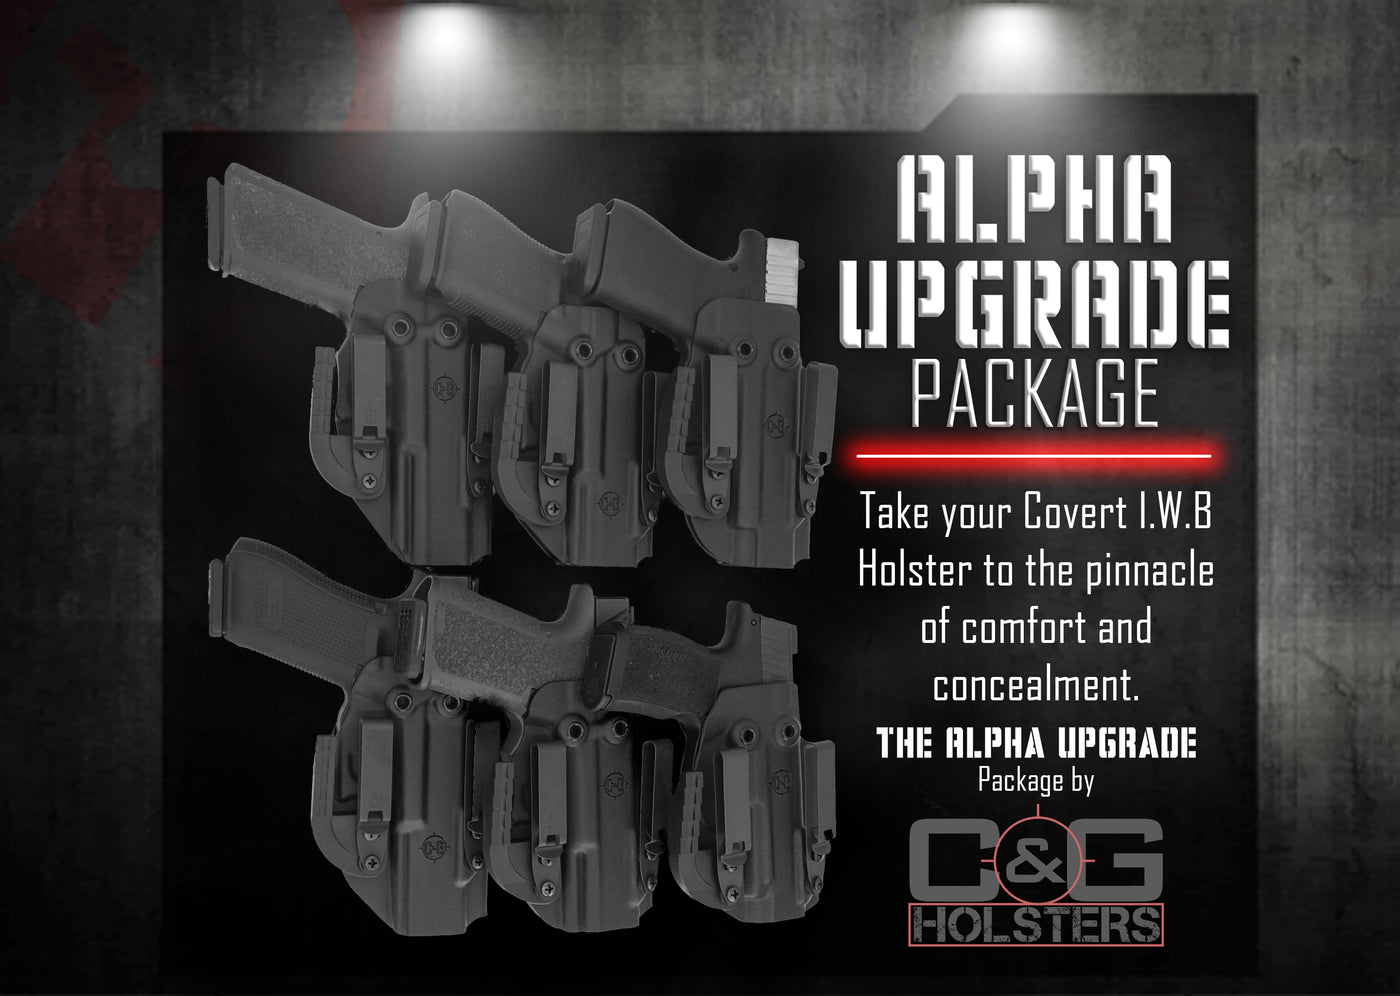 This is the Alpha Upgrade Package which is a Kydex Holster designed and handcrafted by C&G Holsters.   It is an Inside the Waistband holster or IWB holster made by C and G Holsters.